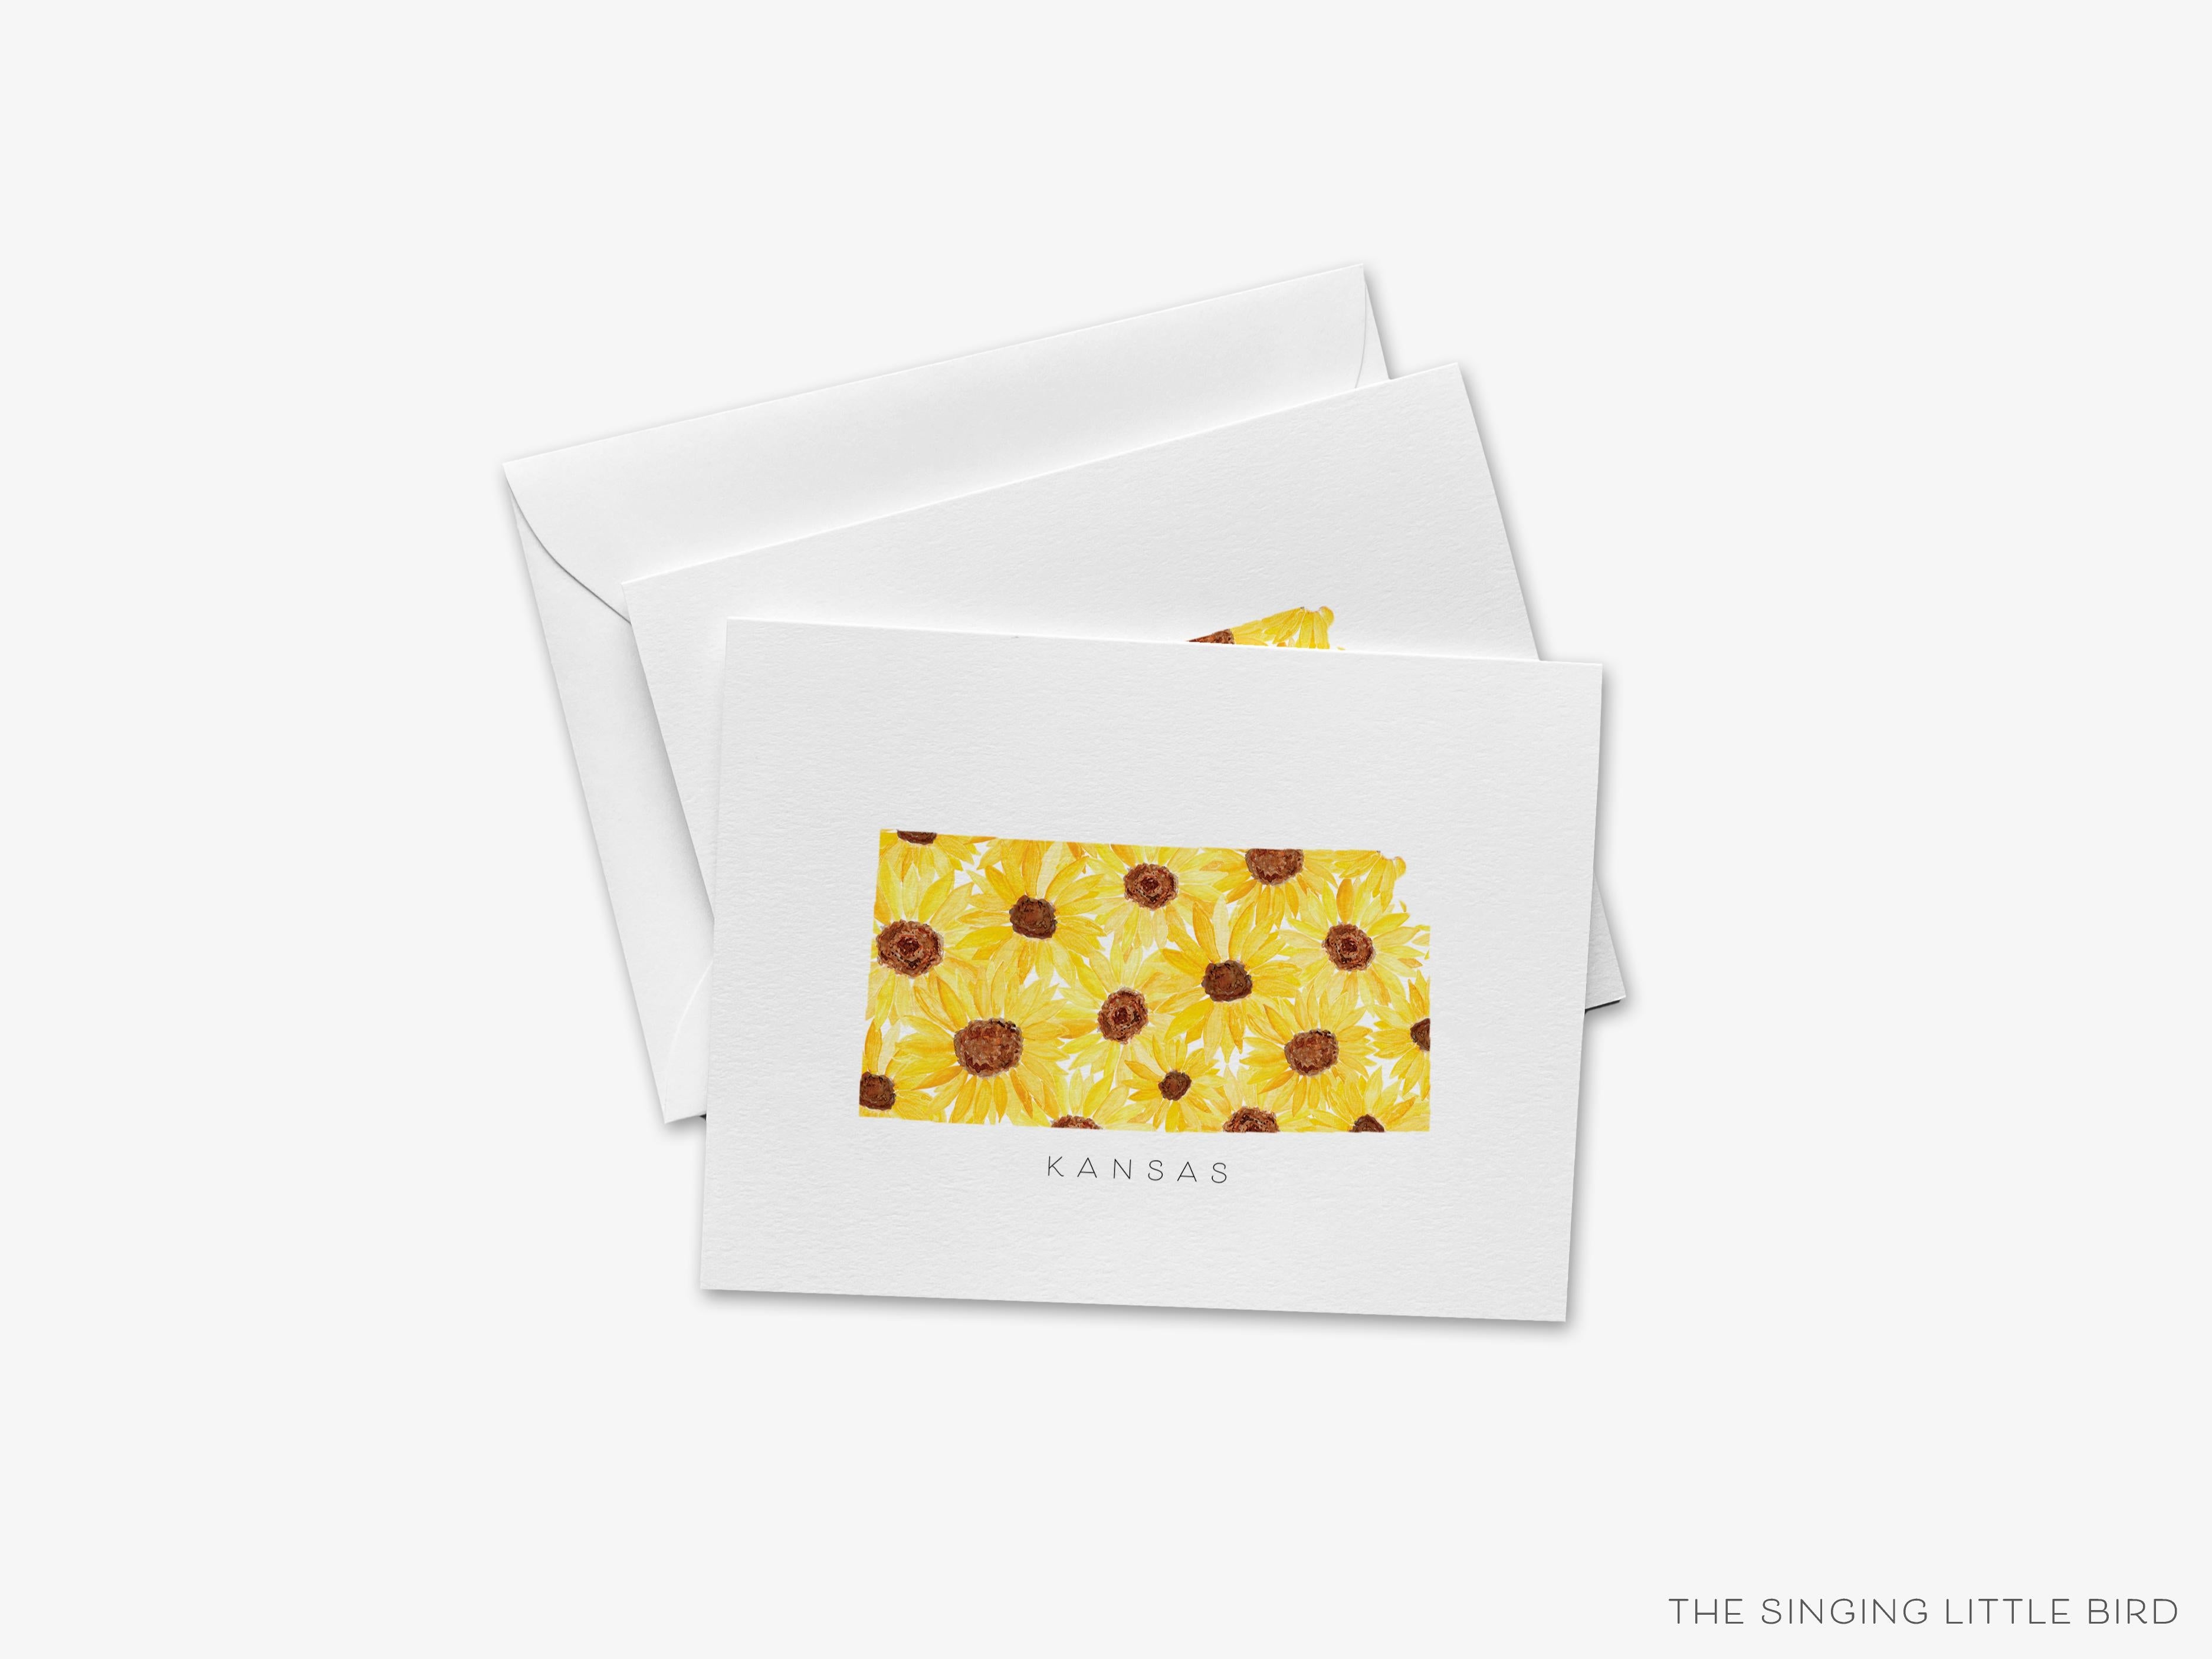 Kansas Sunflower Greeting Card-These folded greeting cards are 4.25x5.5 and feature our hand-painted sunflowers, printed in the USA on 100lb textured stock. They come with a White envelope and make a great thinking of you card for the Kansas and sunflower lover in your life.-The Singing Little Bird